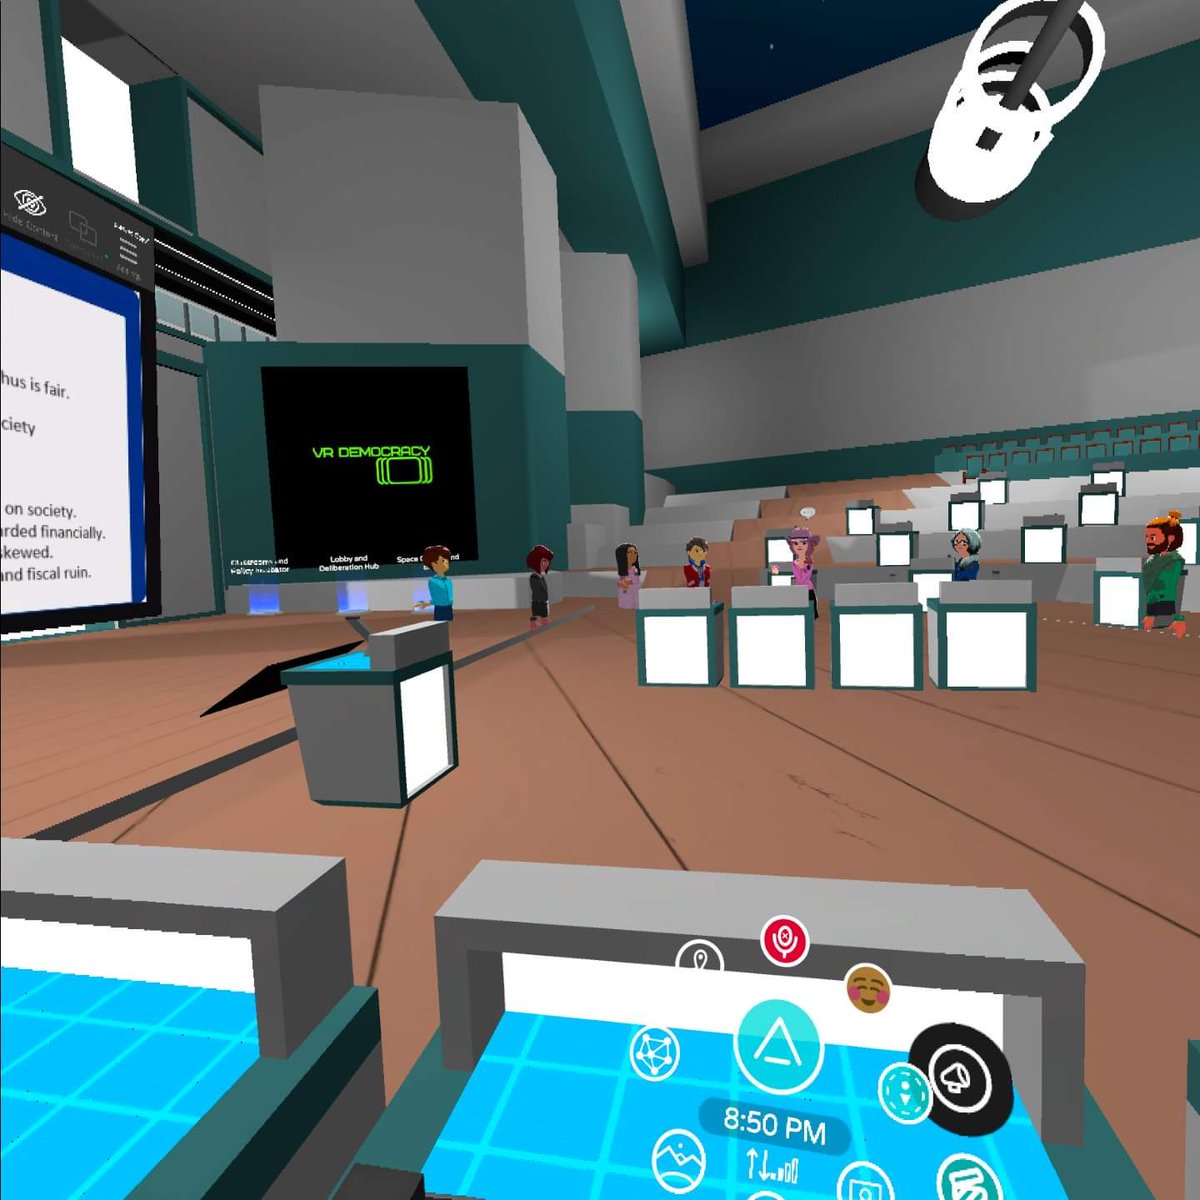 One of the things that Microsoft also shut down when they Killed-off altSpaceVR :

Monthly:
Virtual Debates on Ai and XR ethics